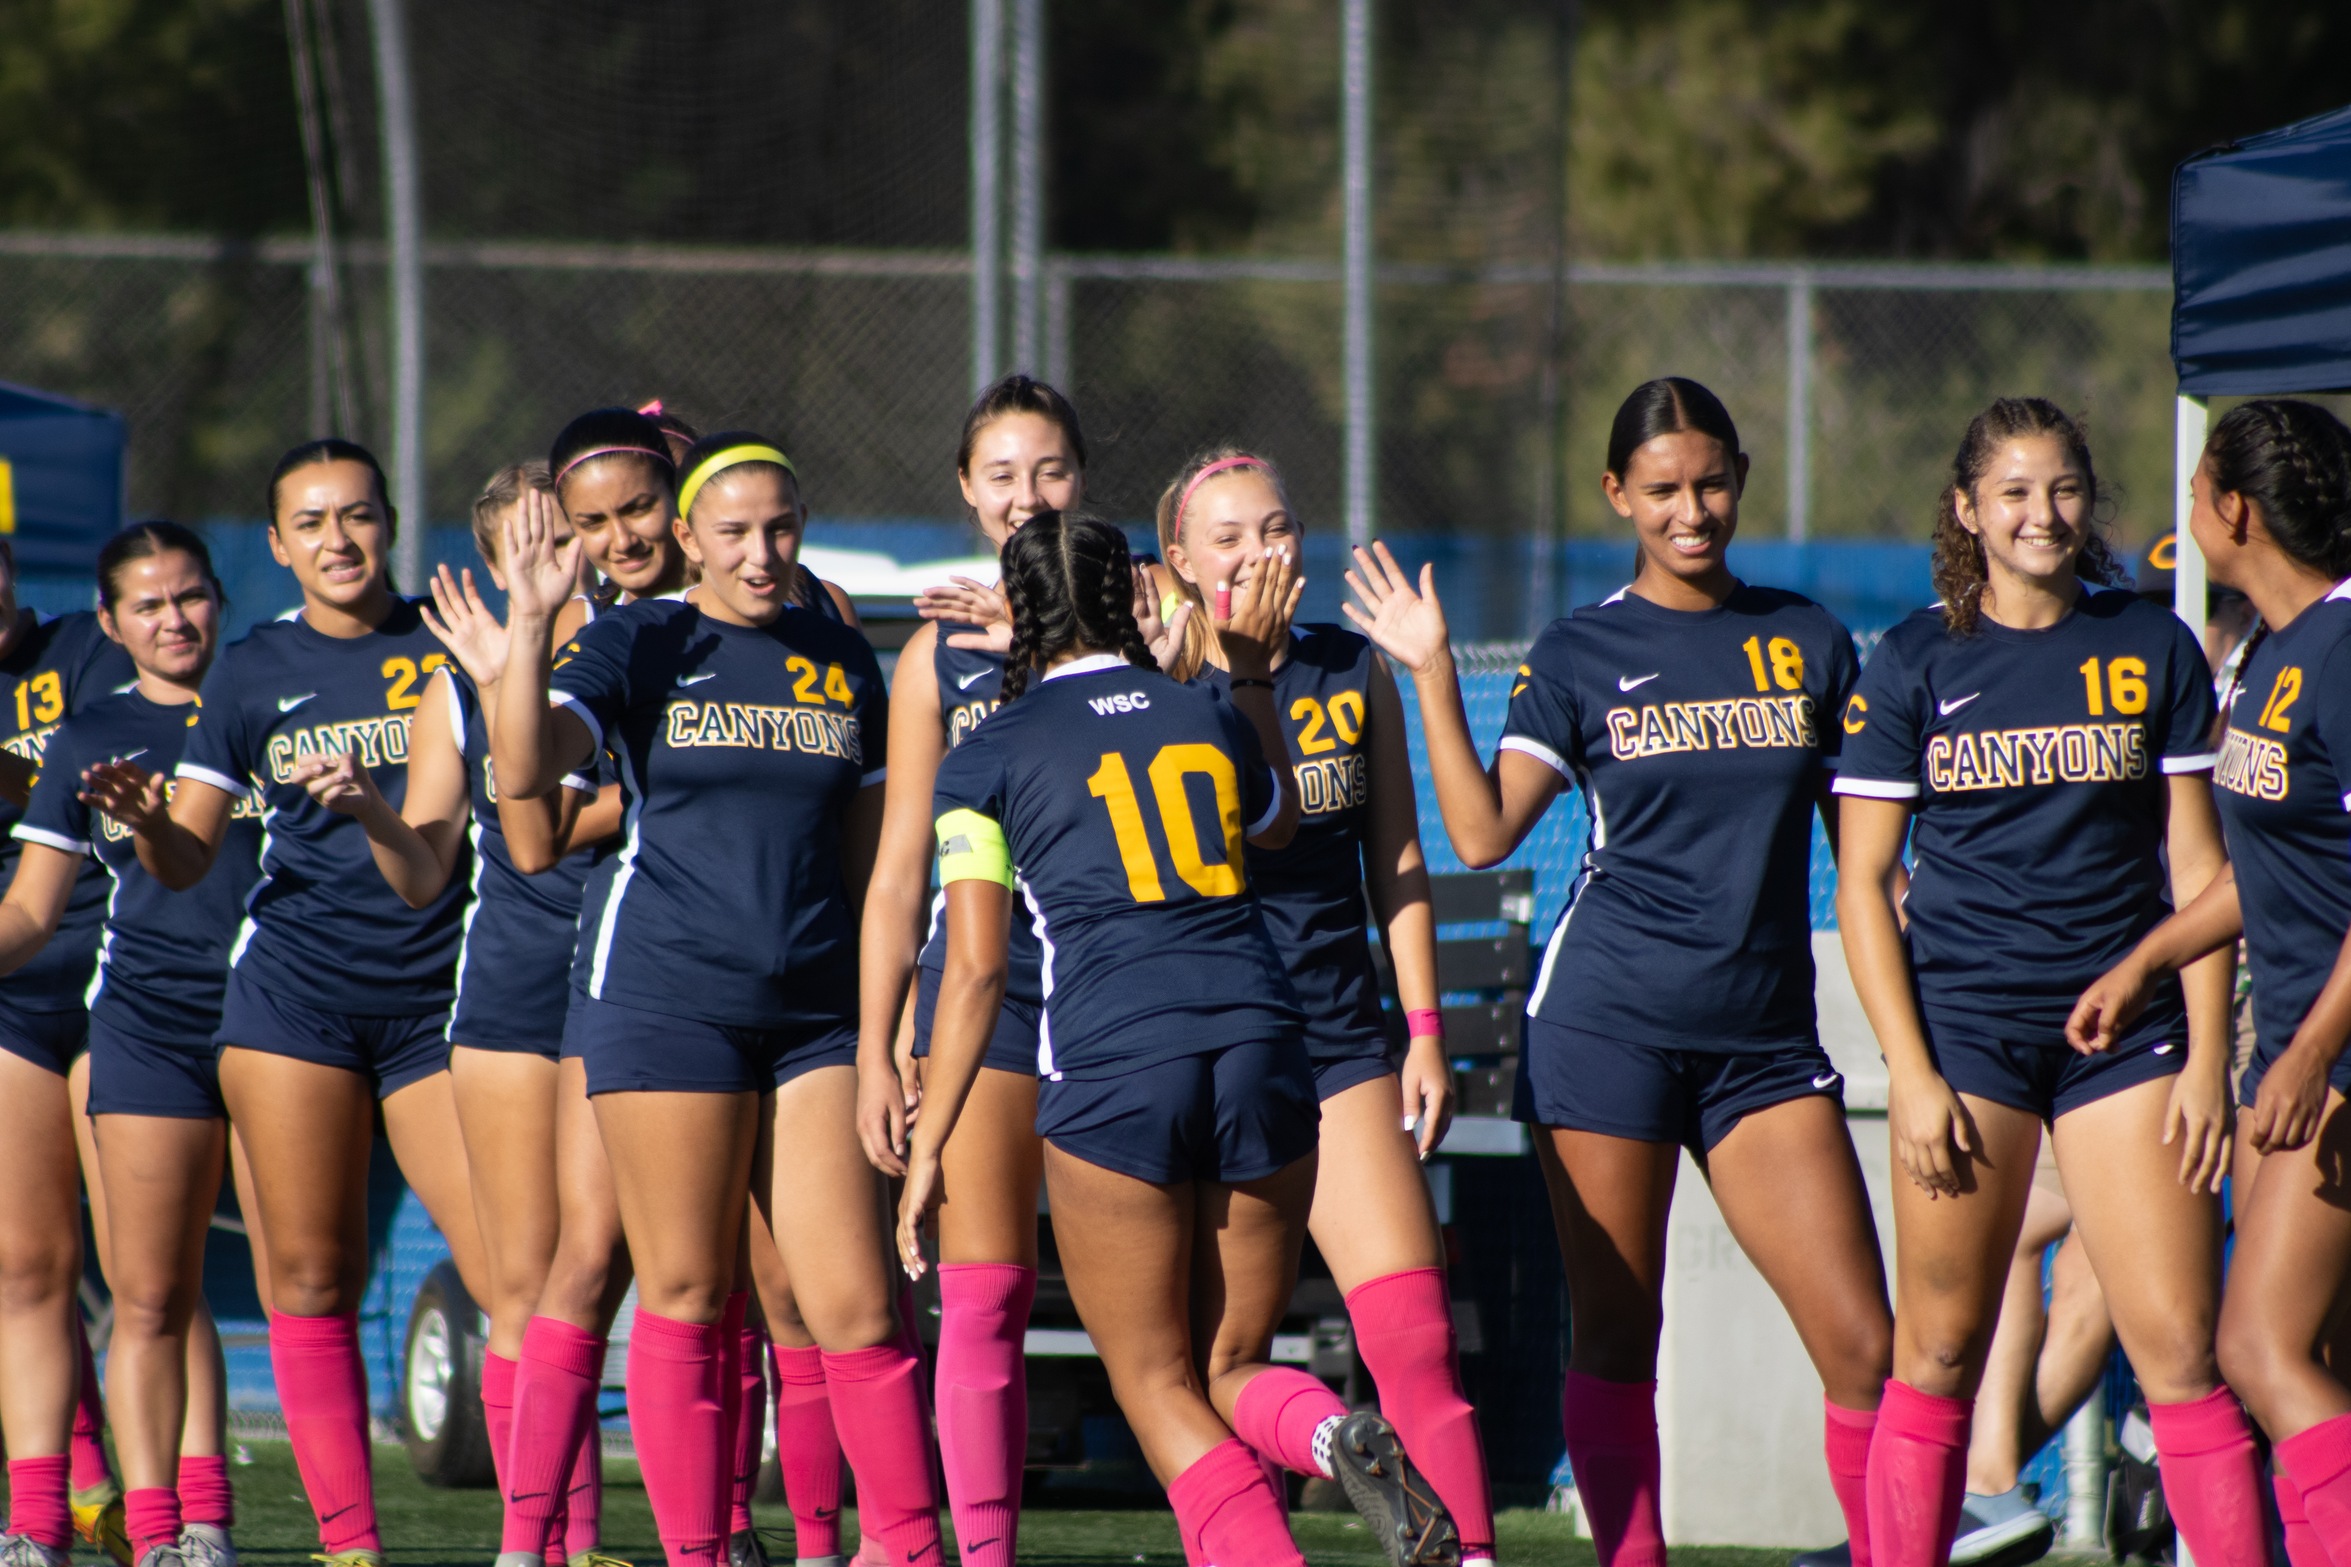 Stock College of the Canyons women's soccer image featuring a player running down a line of other players giving high fives.